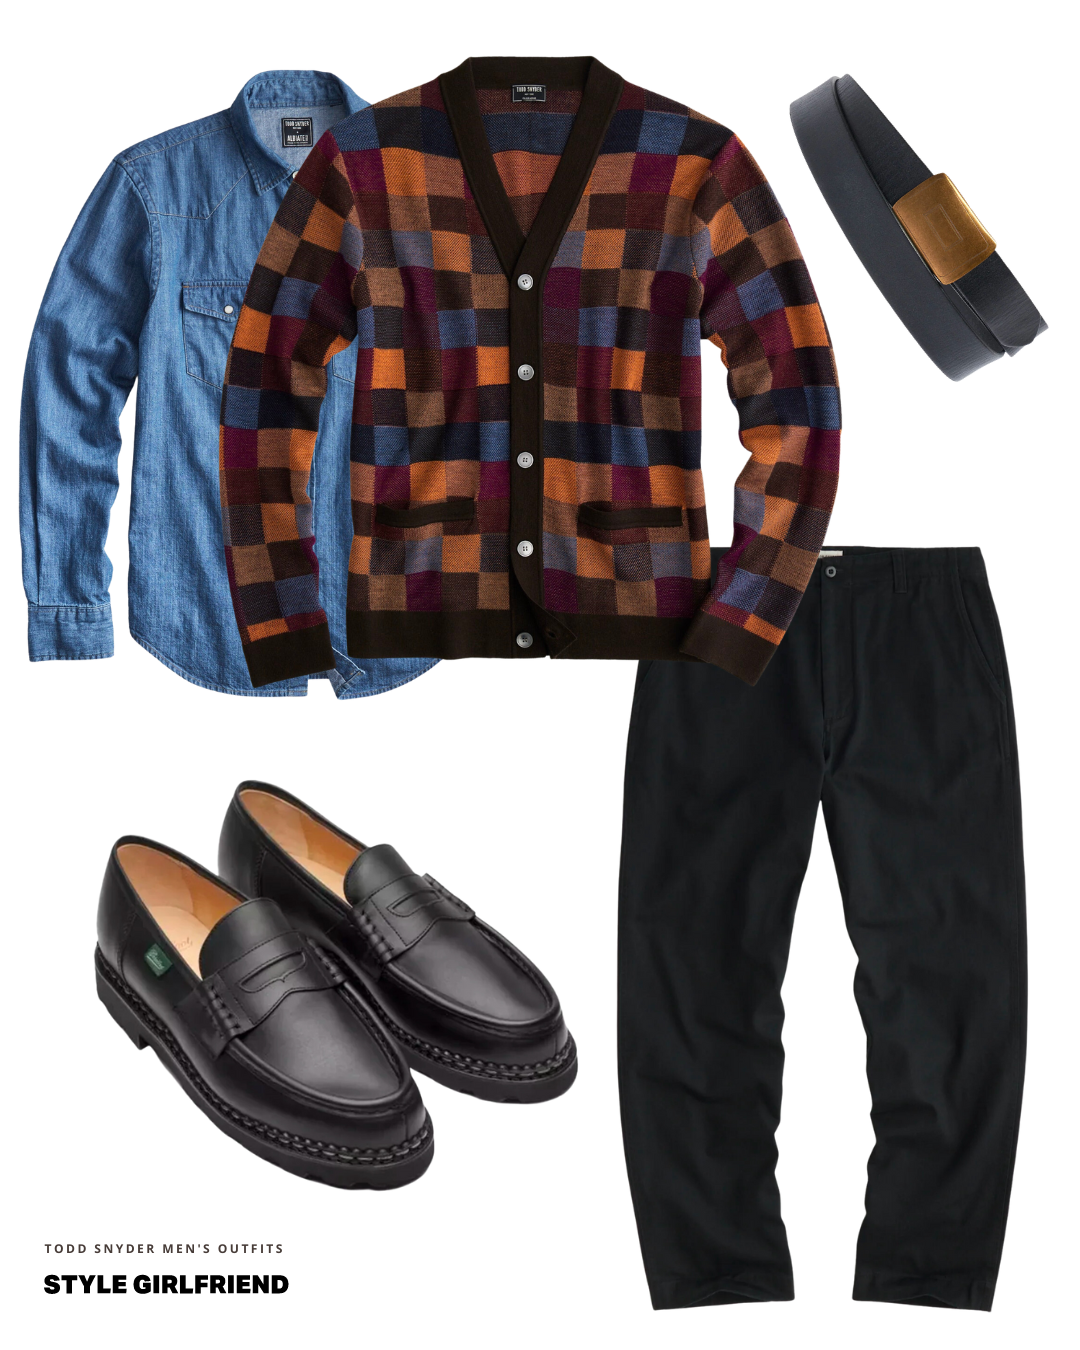 Todd Snyder fall outfit with cardigan and wide leg chinos